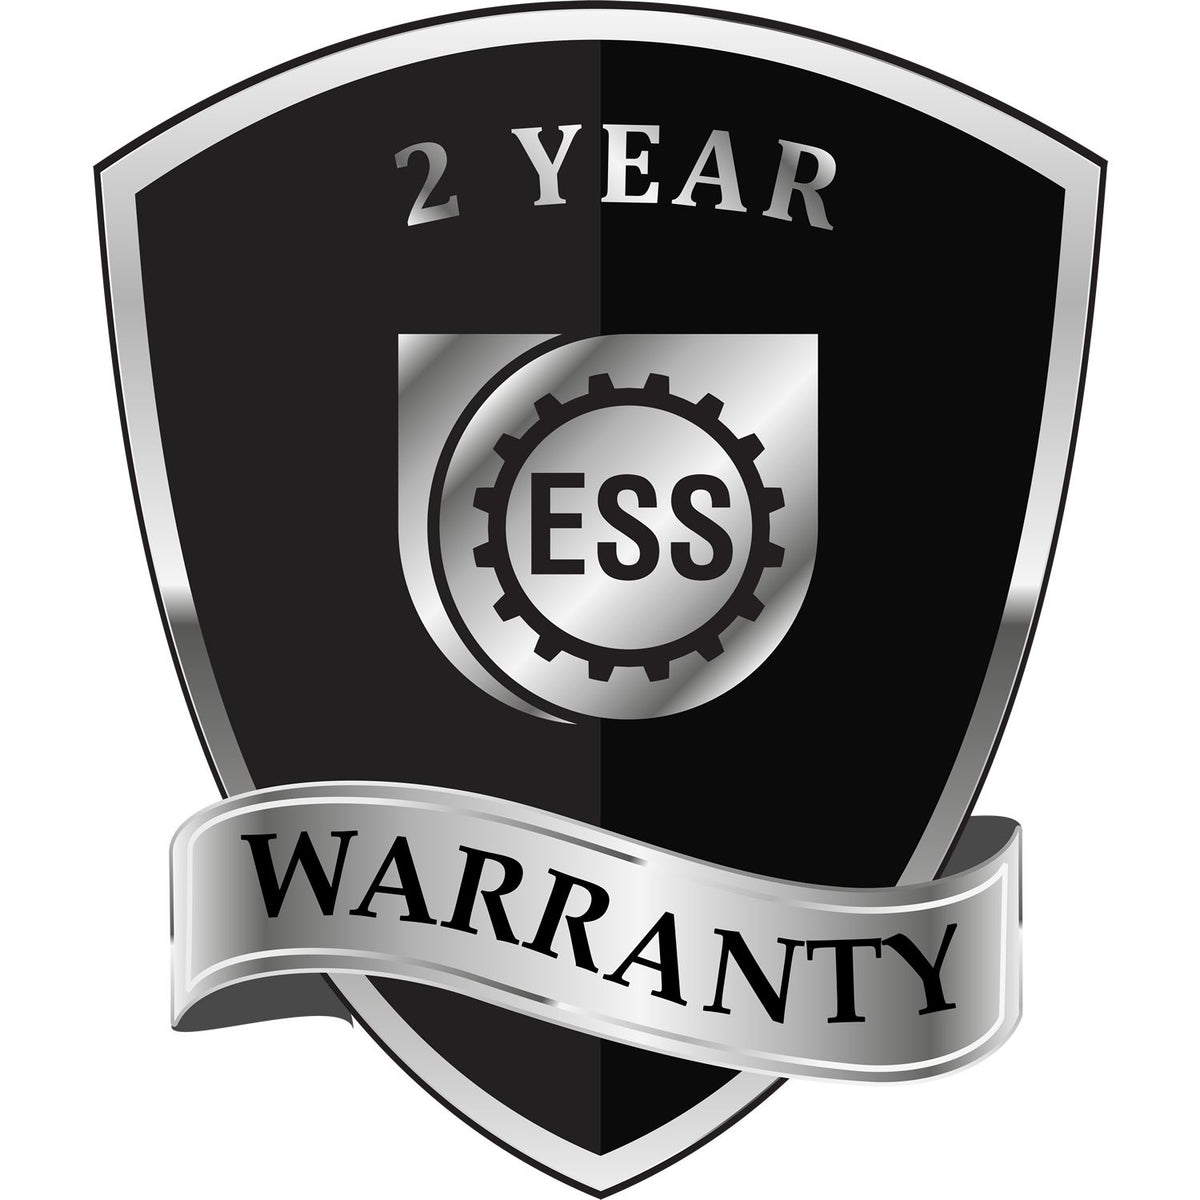 A black and silver badge or emblem showing warranty information for the Gift Virginia Landscape Architect Seal